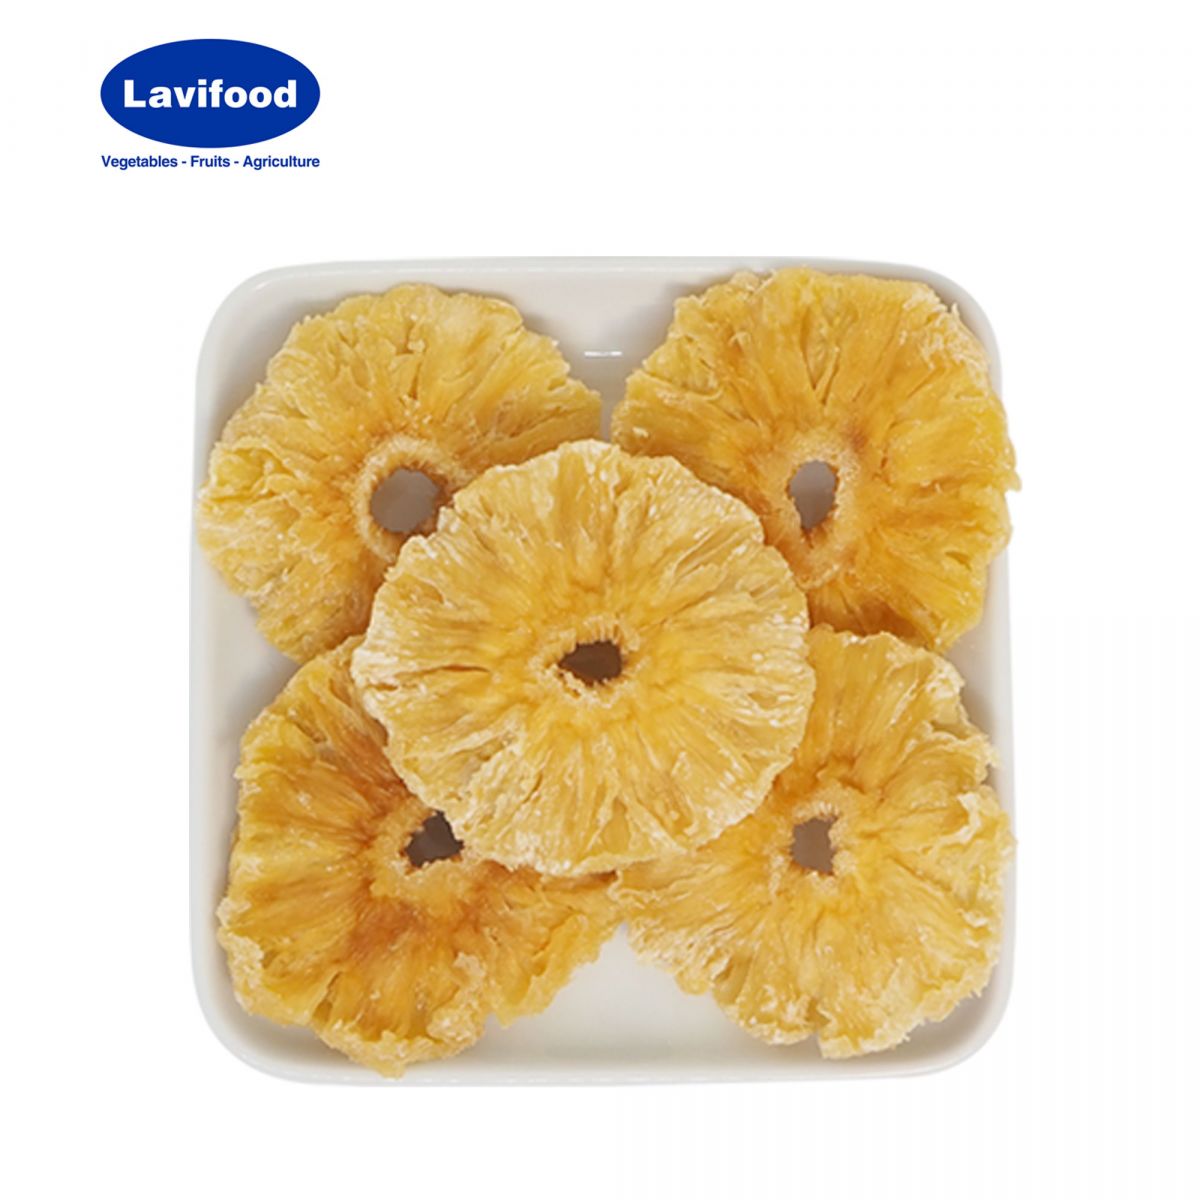 http://lavifood.com/en/products/dried-fruit-vegetables/dried-pinaeapple